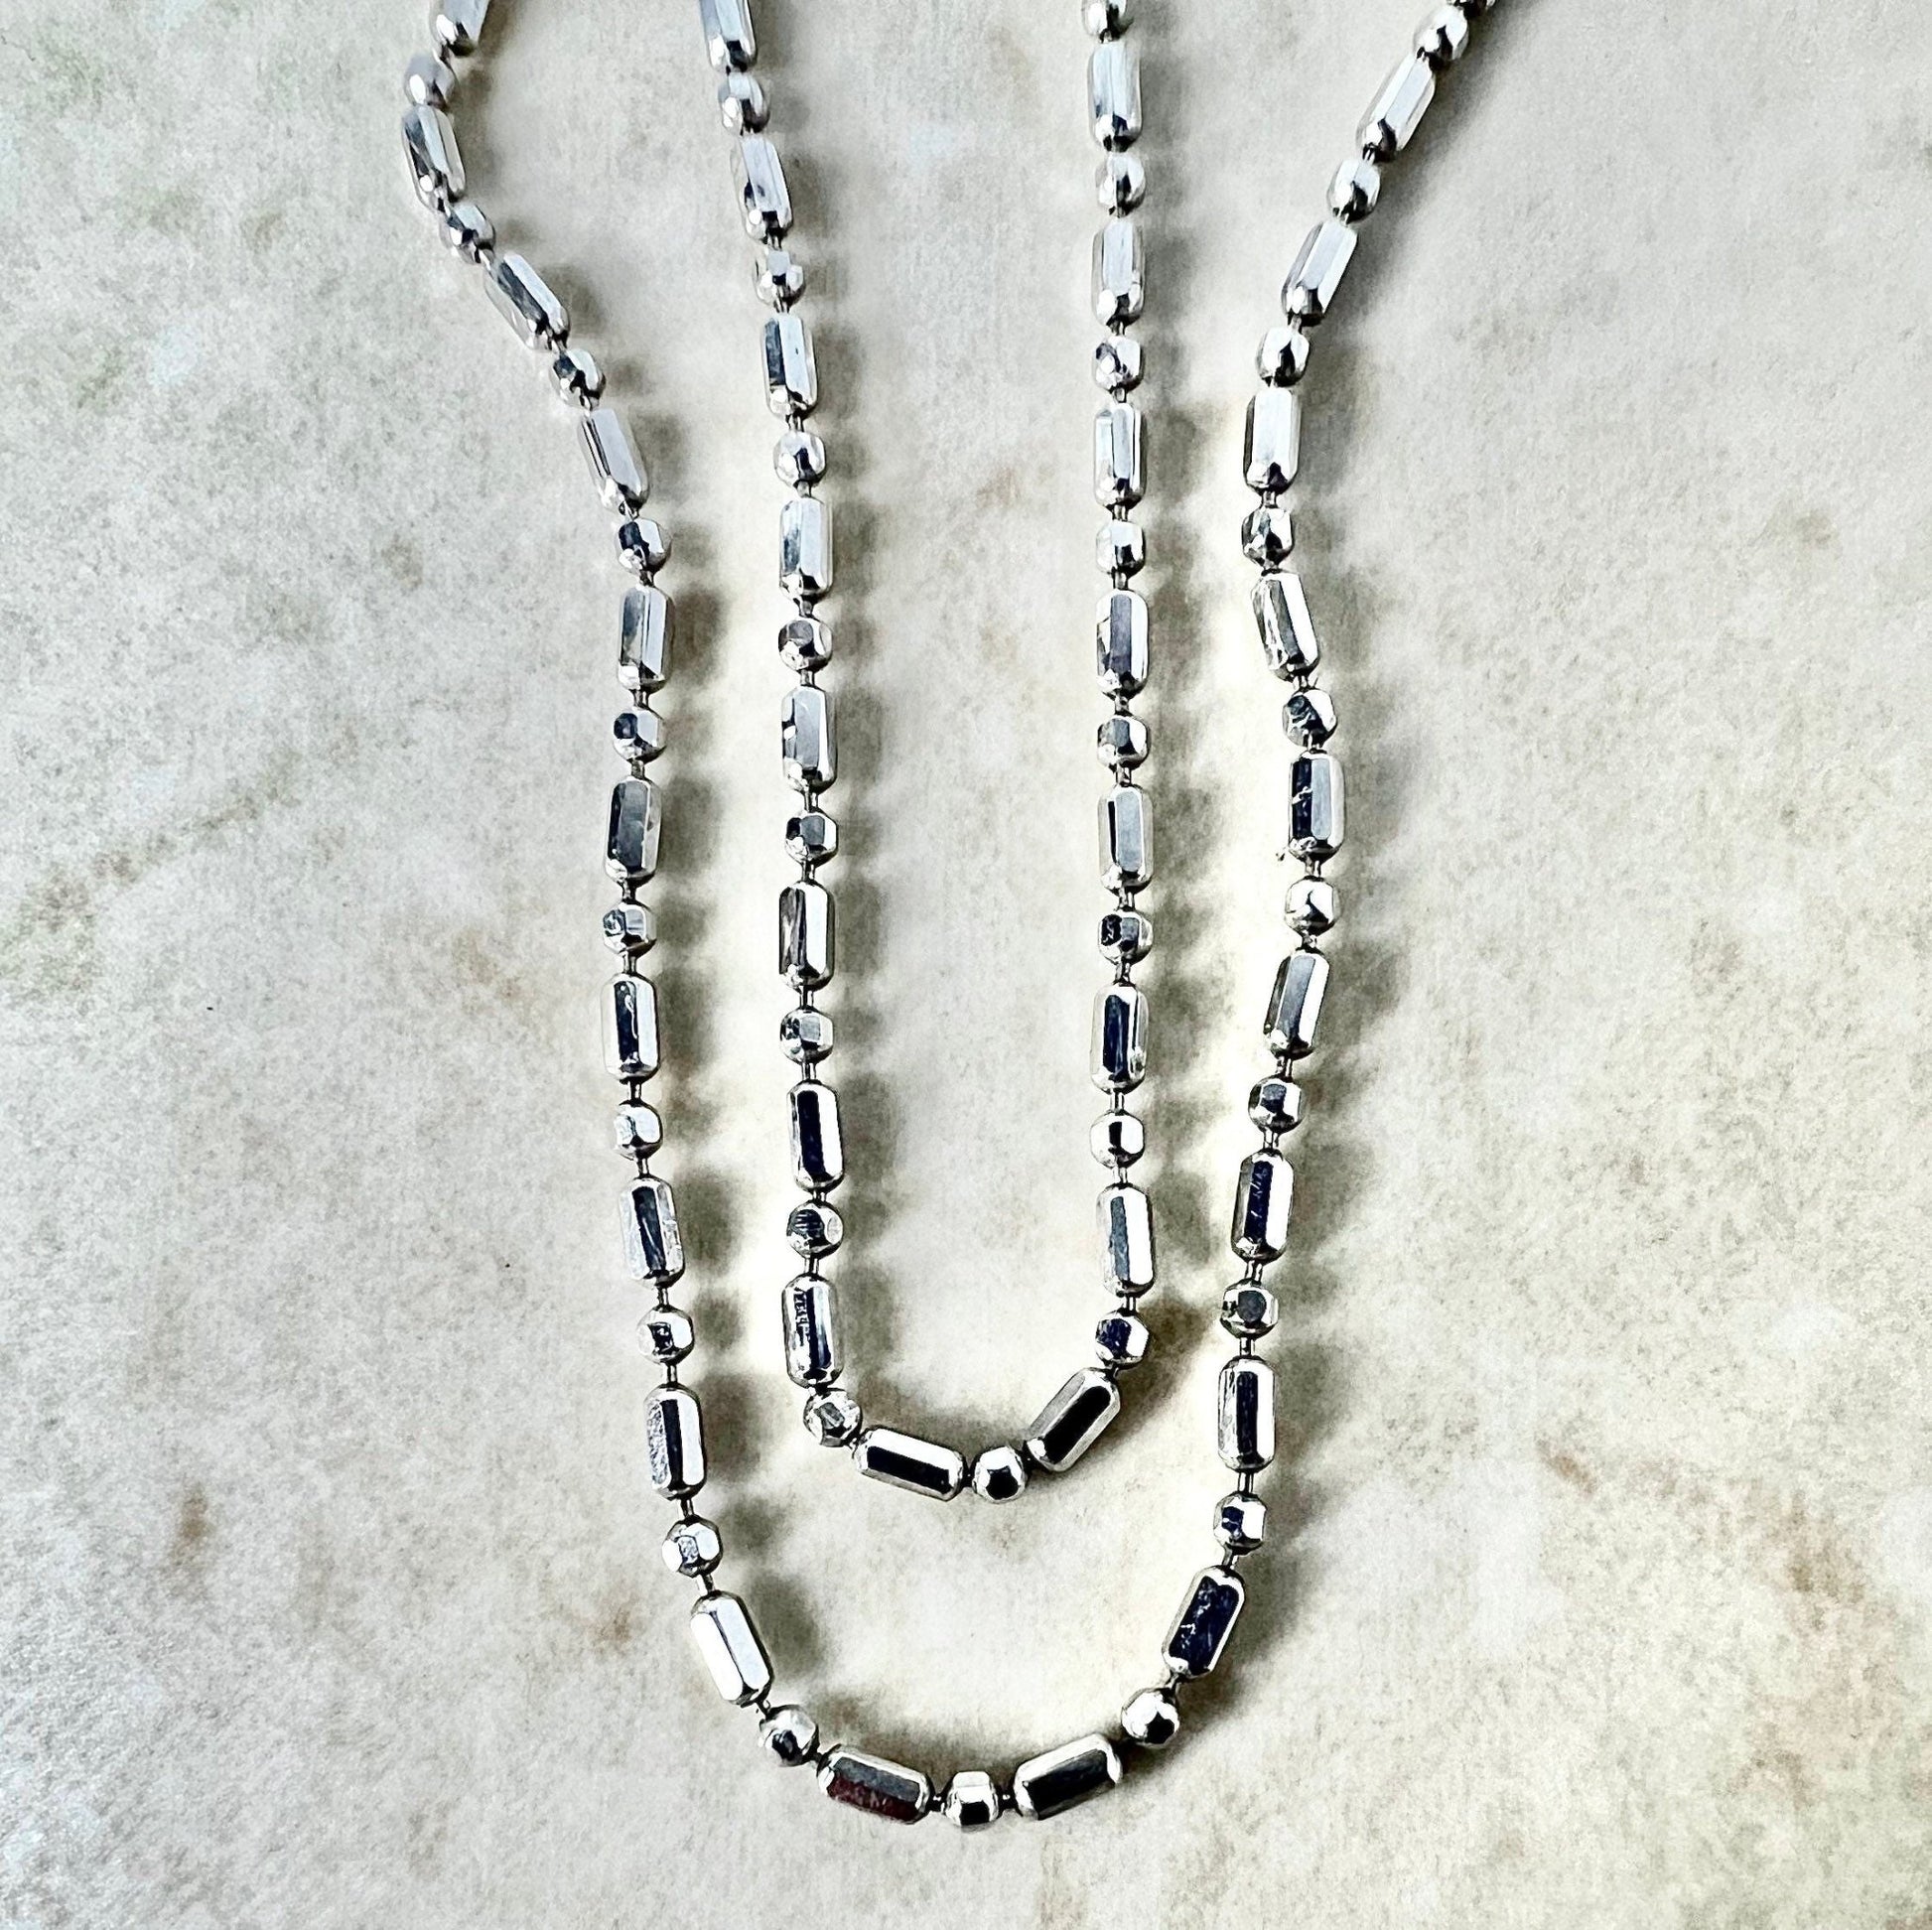 14K White Gold Bar And Bead Chain - 16.35” Gold Chain - White Gold Chain Necklace - White Gold Necklace - Best Gifts For Her - Holiday Gift